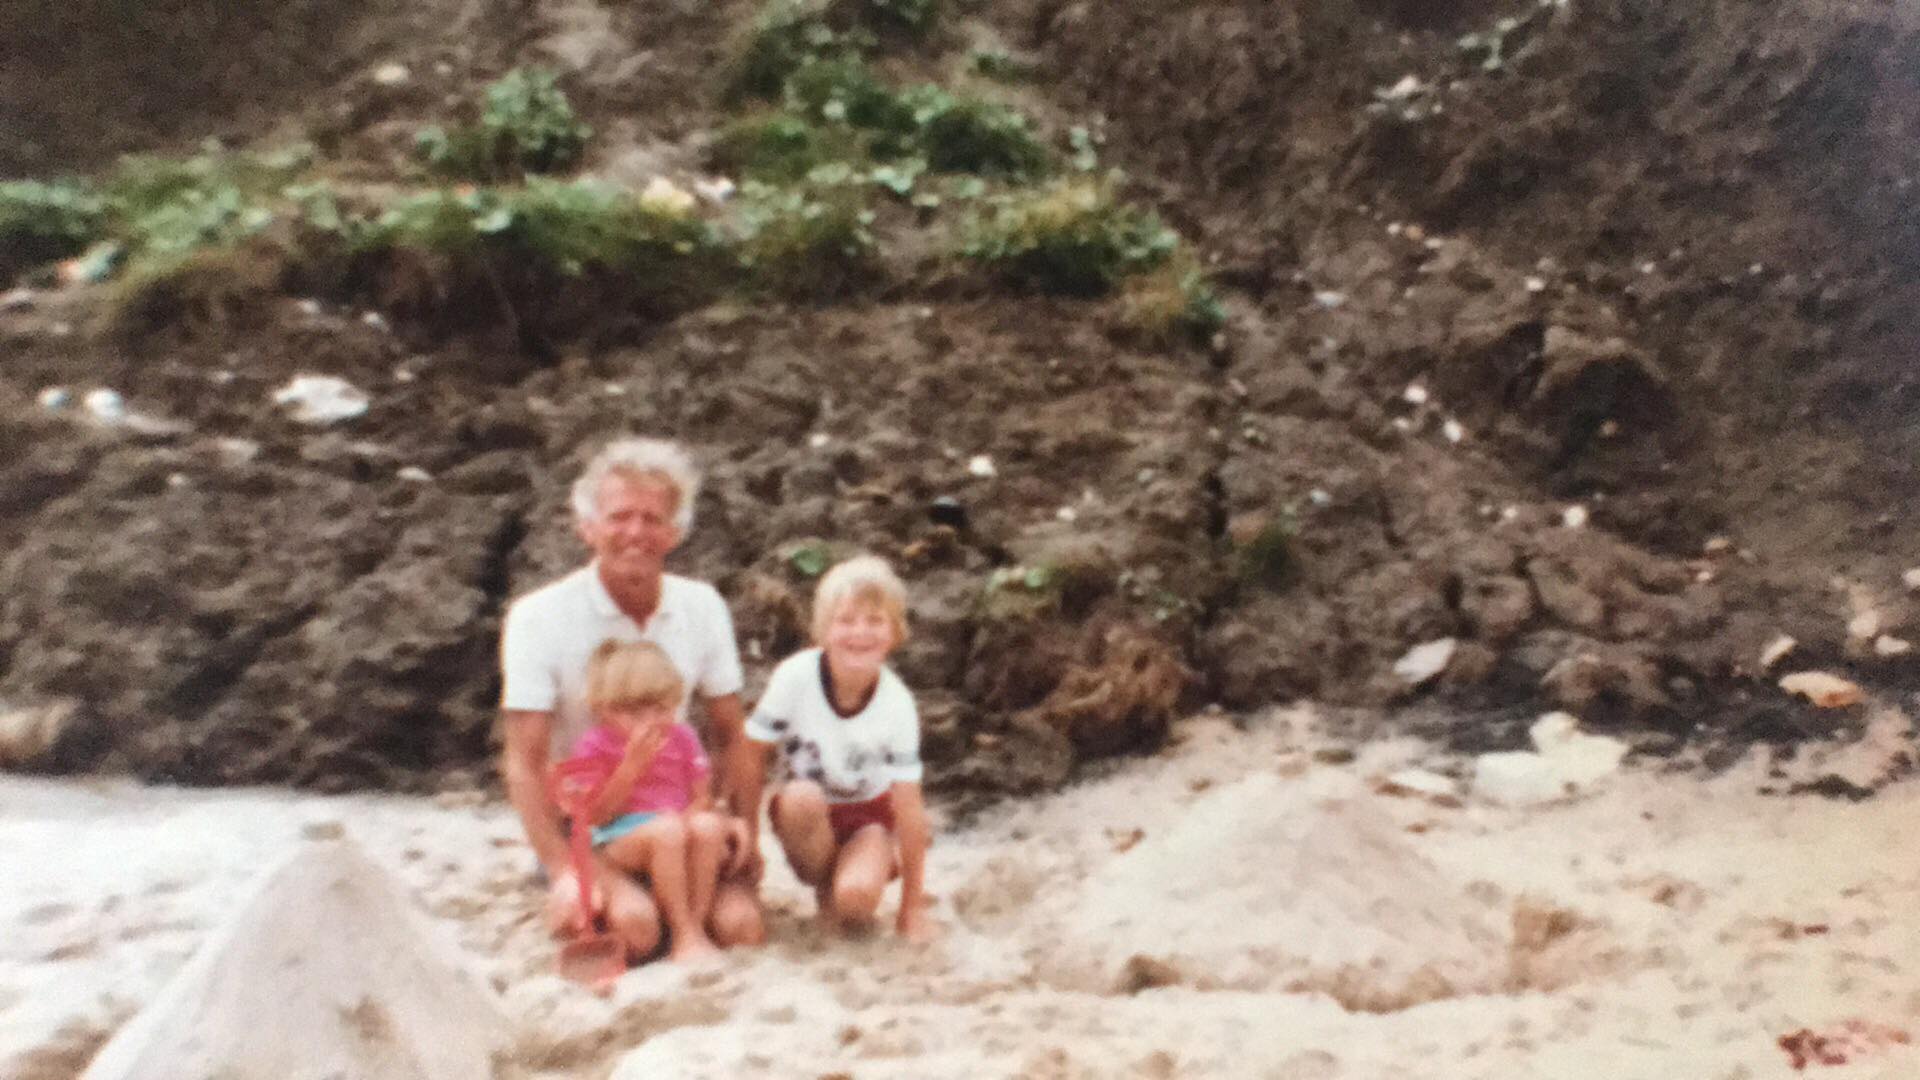 Photo of my Grandad with my and my sister, on a beach, possibly mid-80s